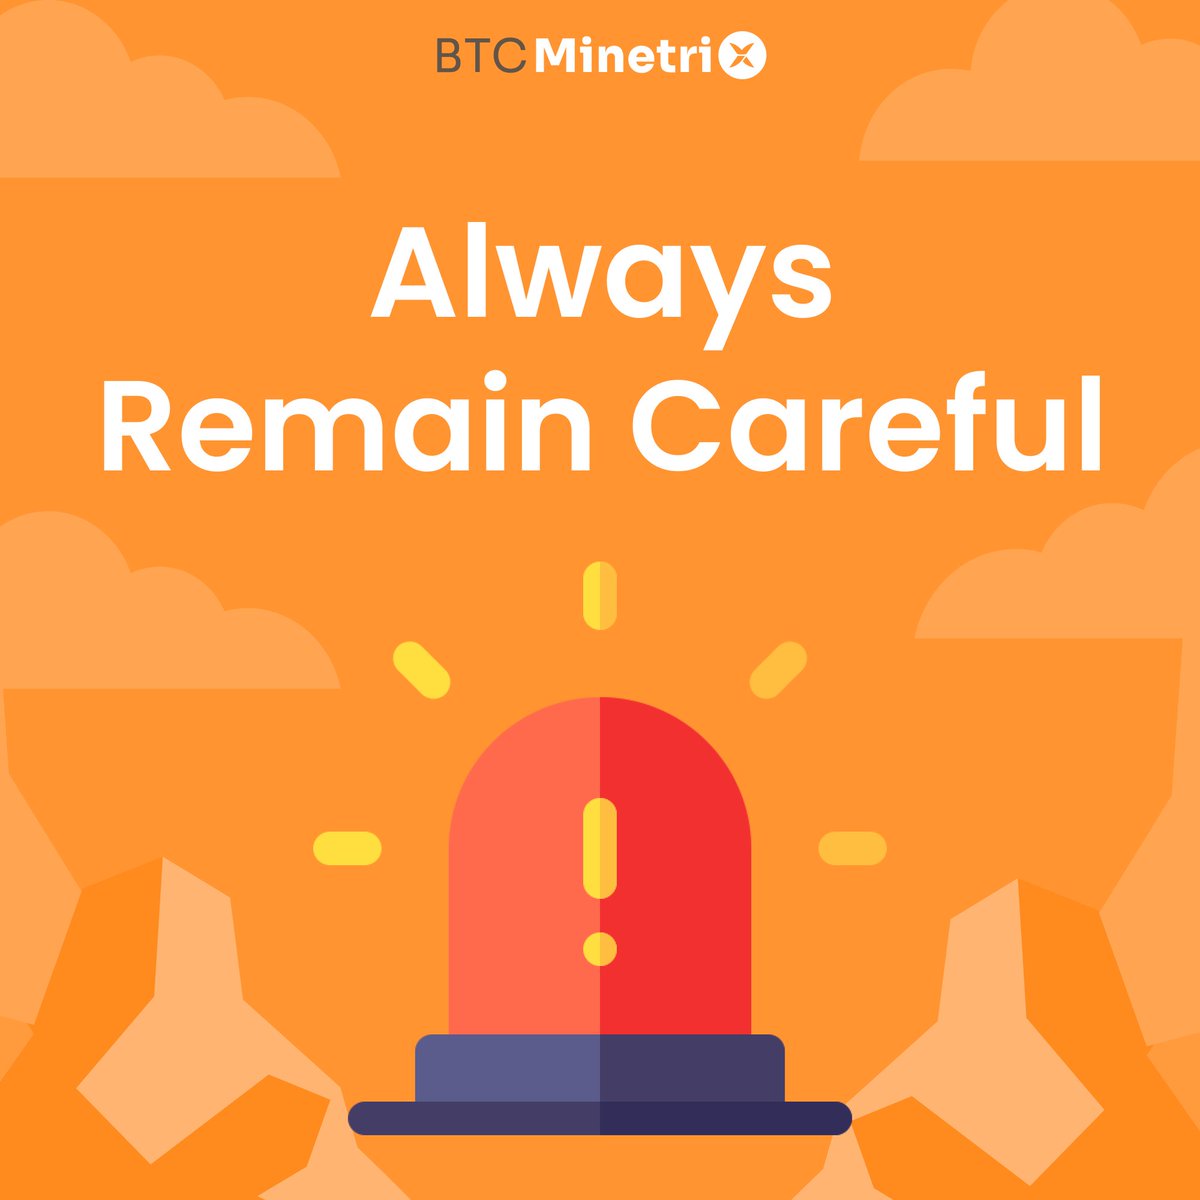 Beware of possible #BTCMTX scams! ⚠️ Our team will never initiate contact with you first. Stay vigilant for messages from accounts pretending to be 'Official', 'Support', 'Assistance' or 'Help'. 🚫 Make sure to not engage with these accounts instead block them immediately.